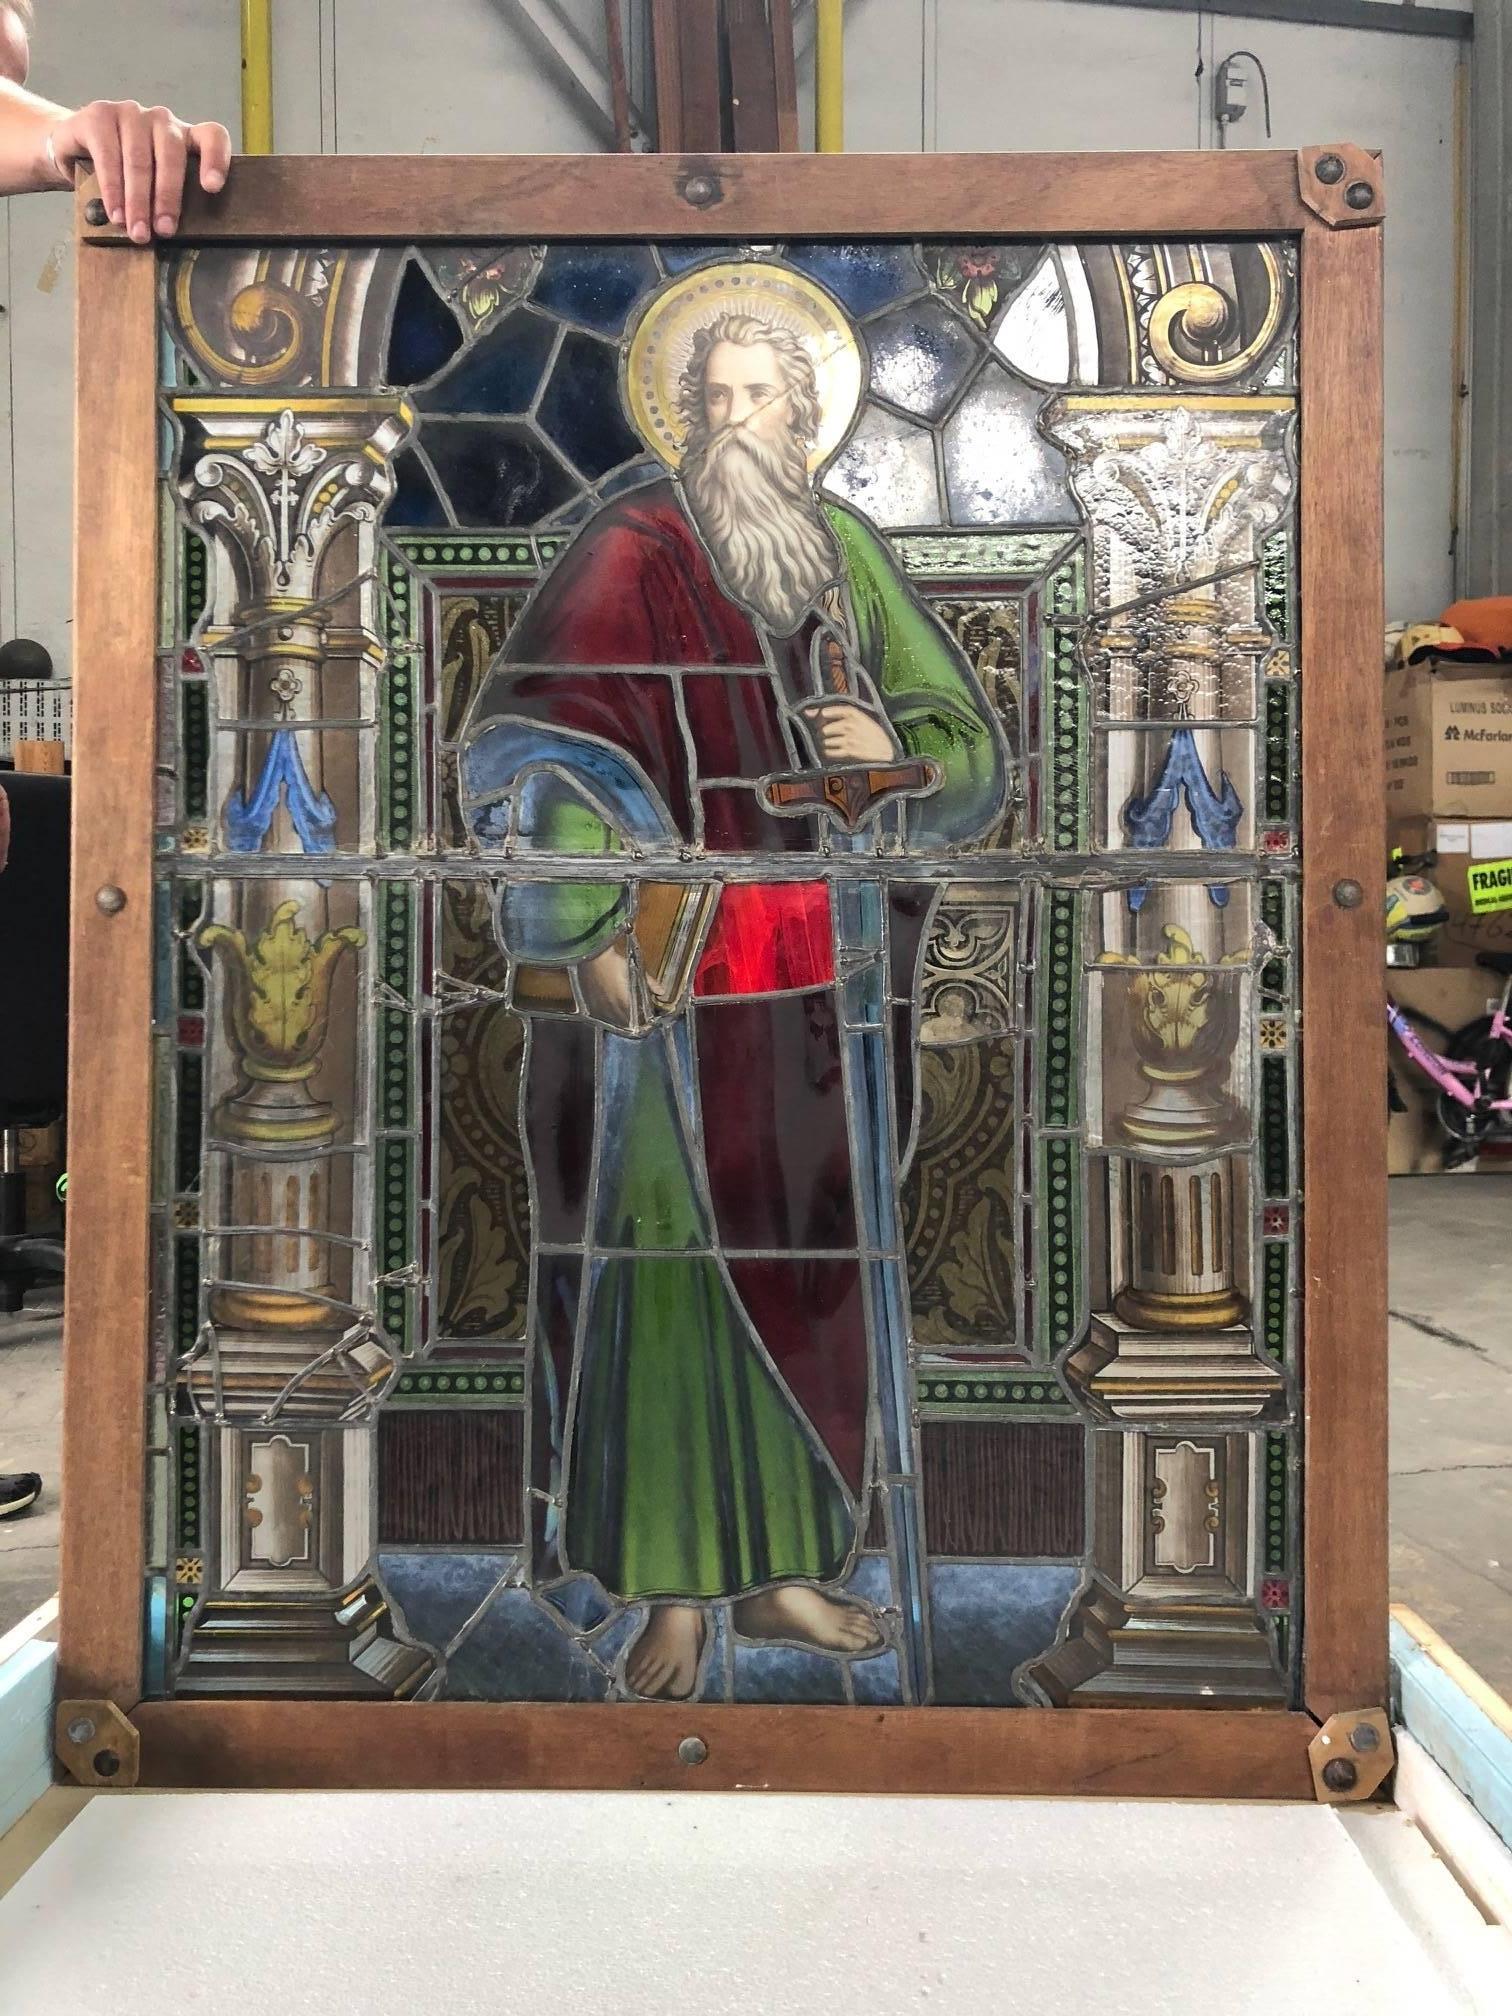 Colorful church window dated back in the early baroque era / 16th century from Leipzig, Germany. Made of wood and stained glass. Original item in a wonderful condition. Features a currently unknown person with a sword and stunning details. With